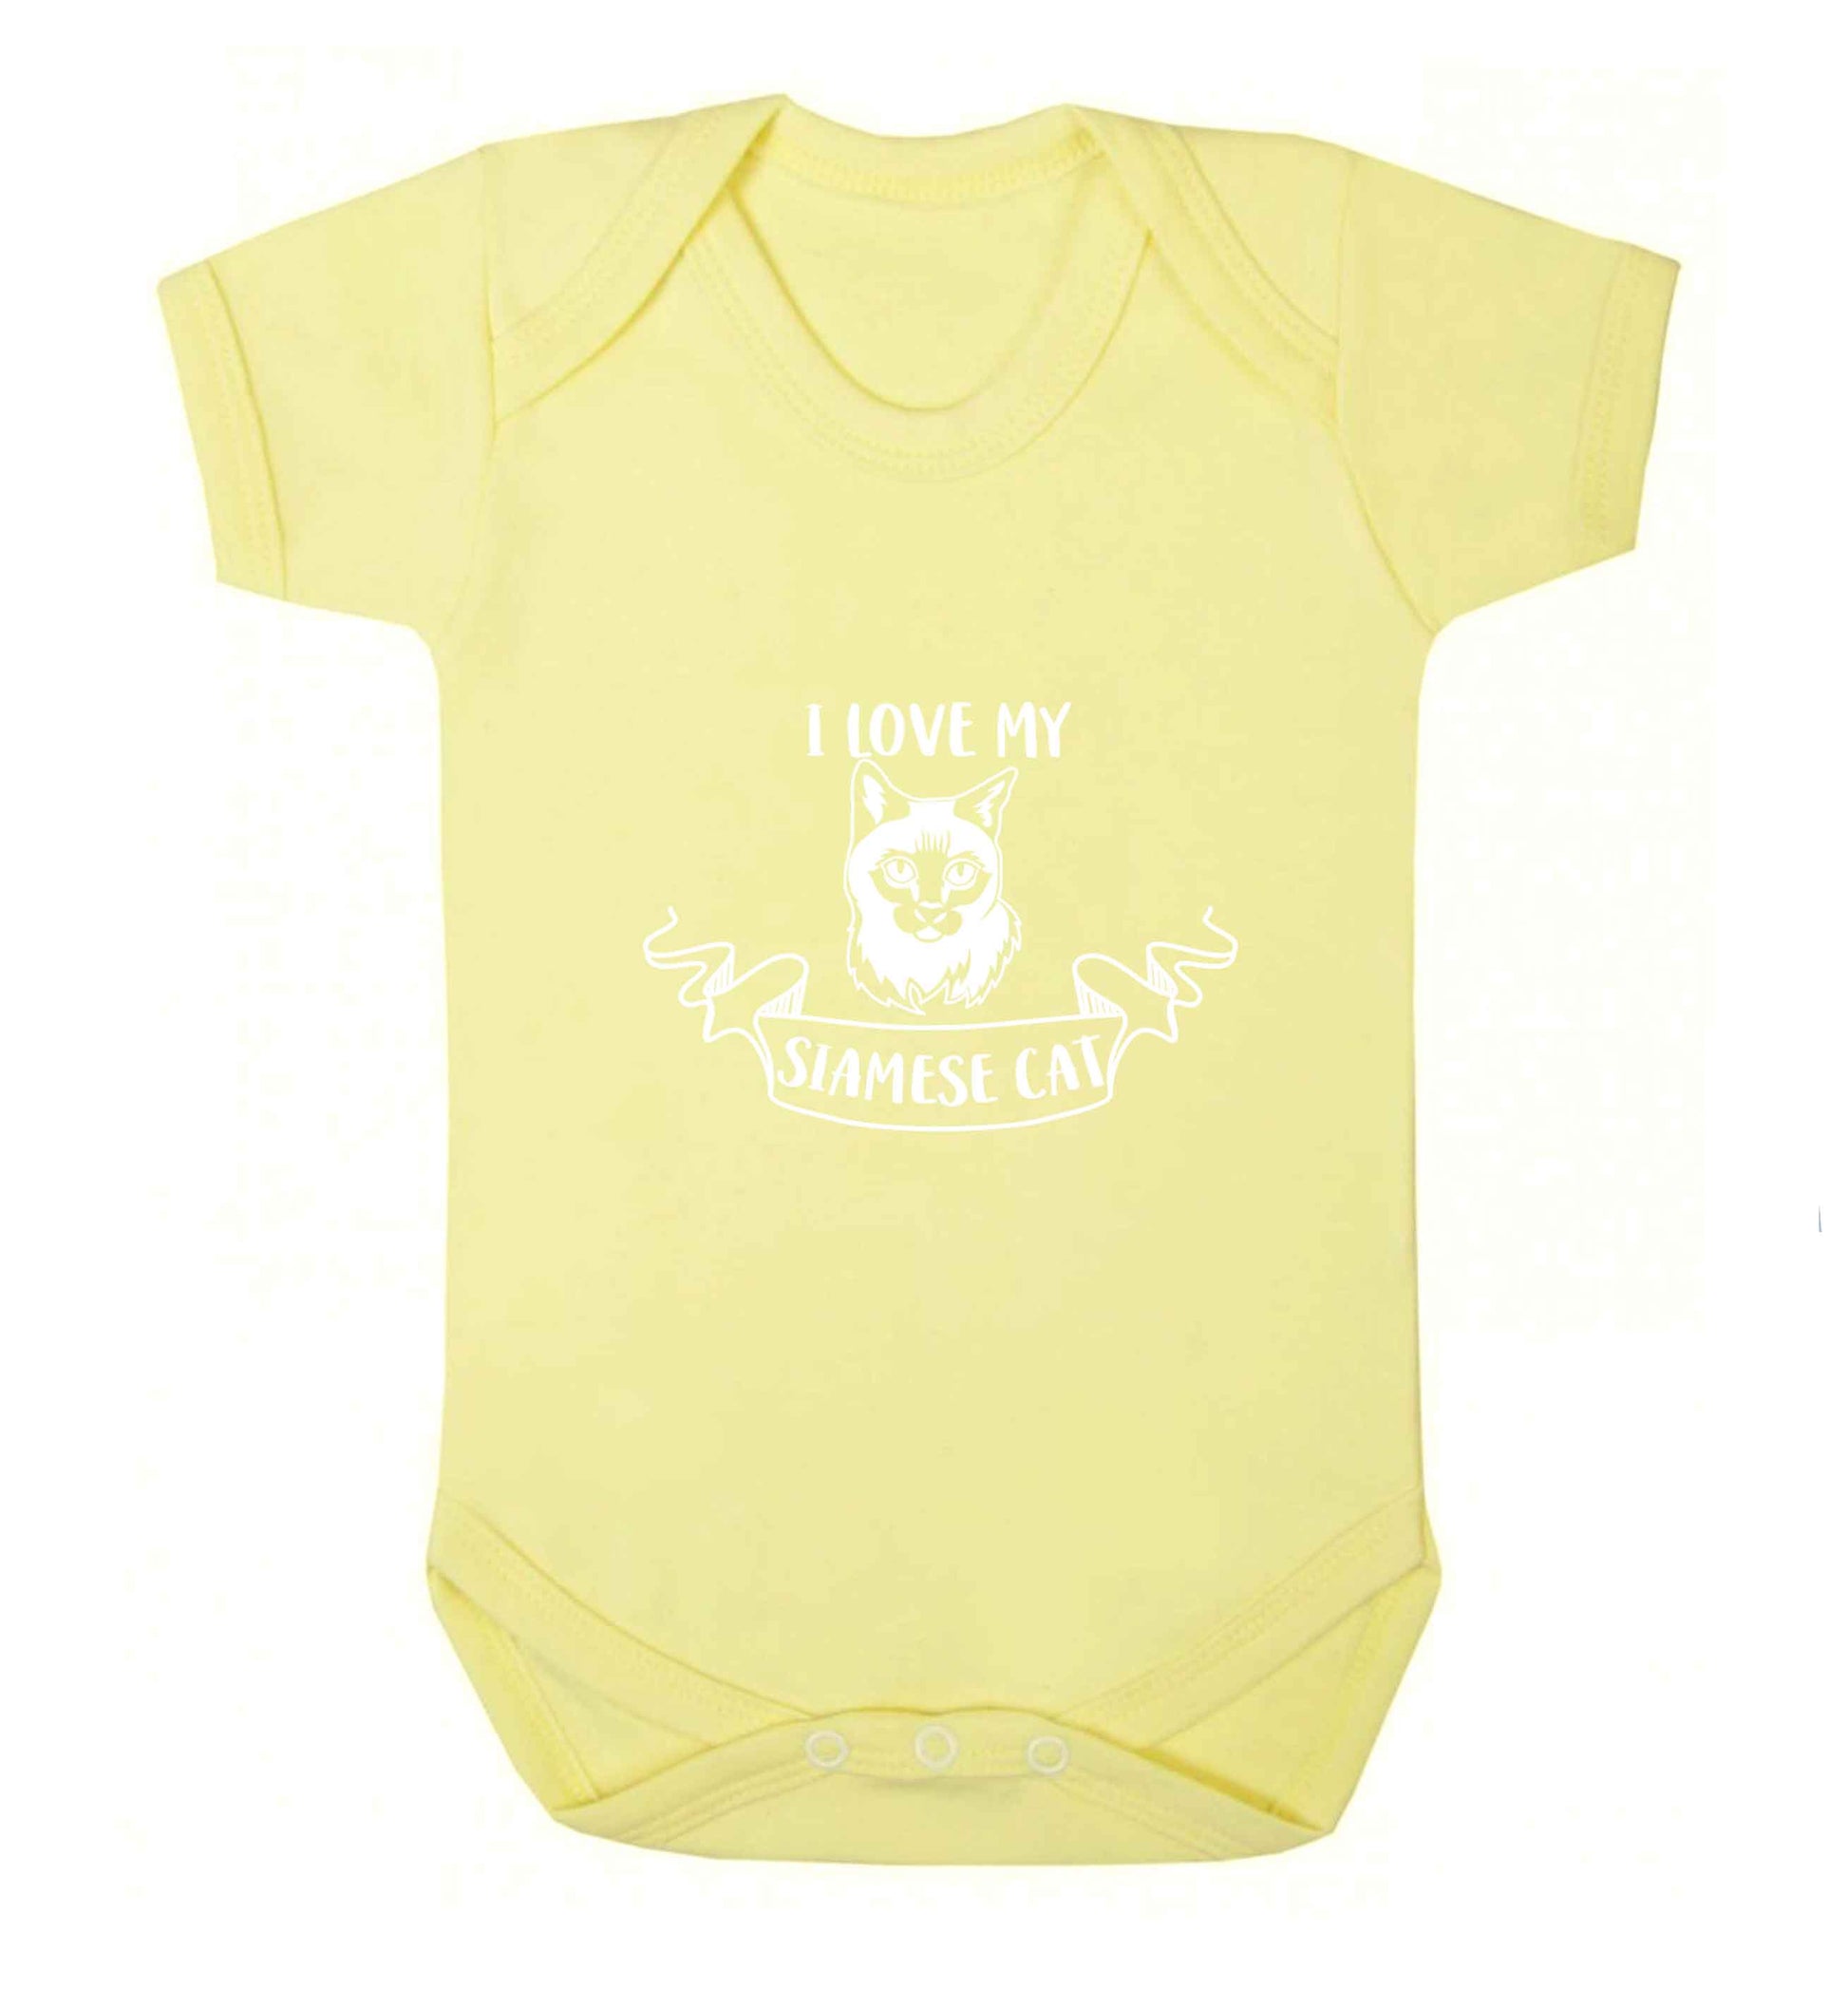 I love my siamese cat baby vest pale yellow 18-24 months